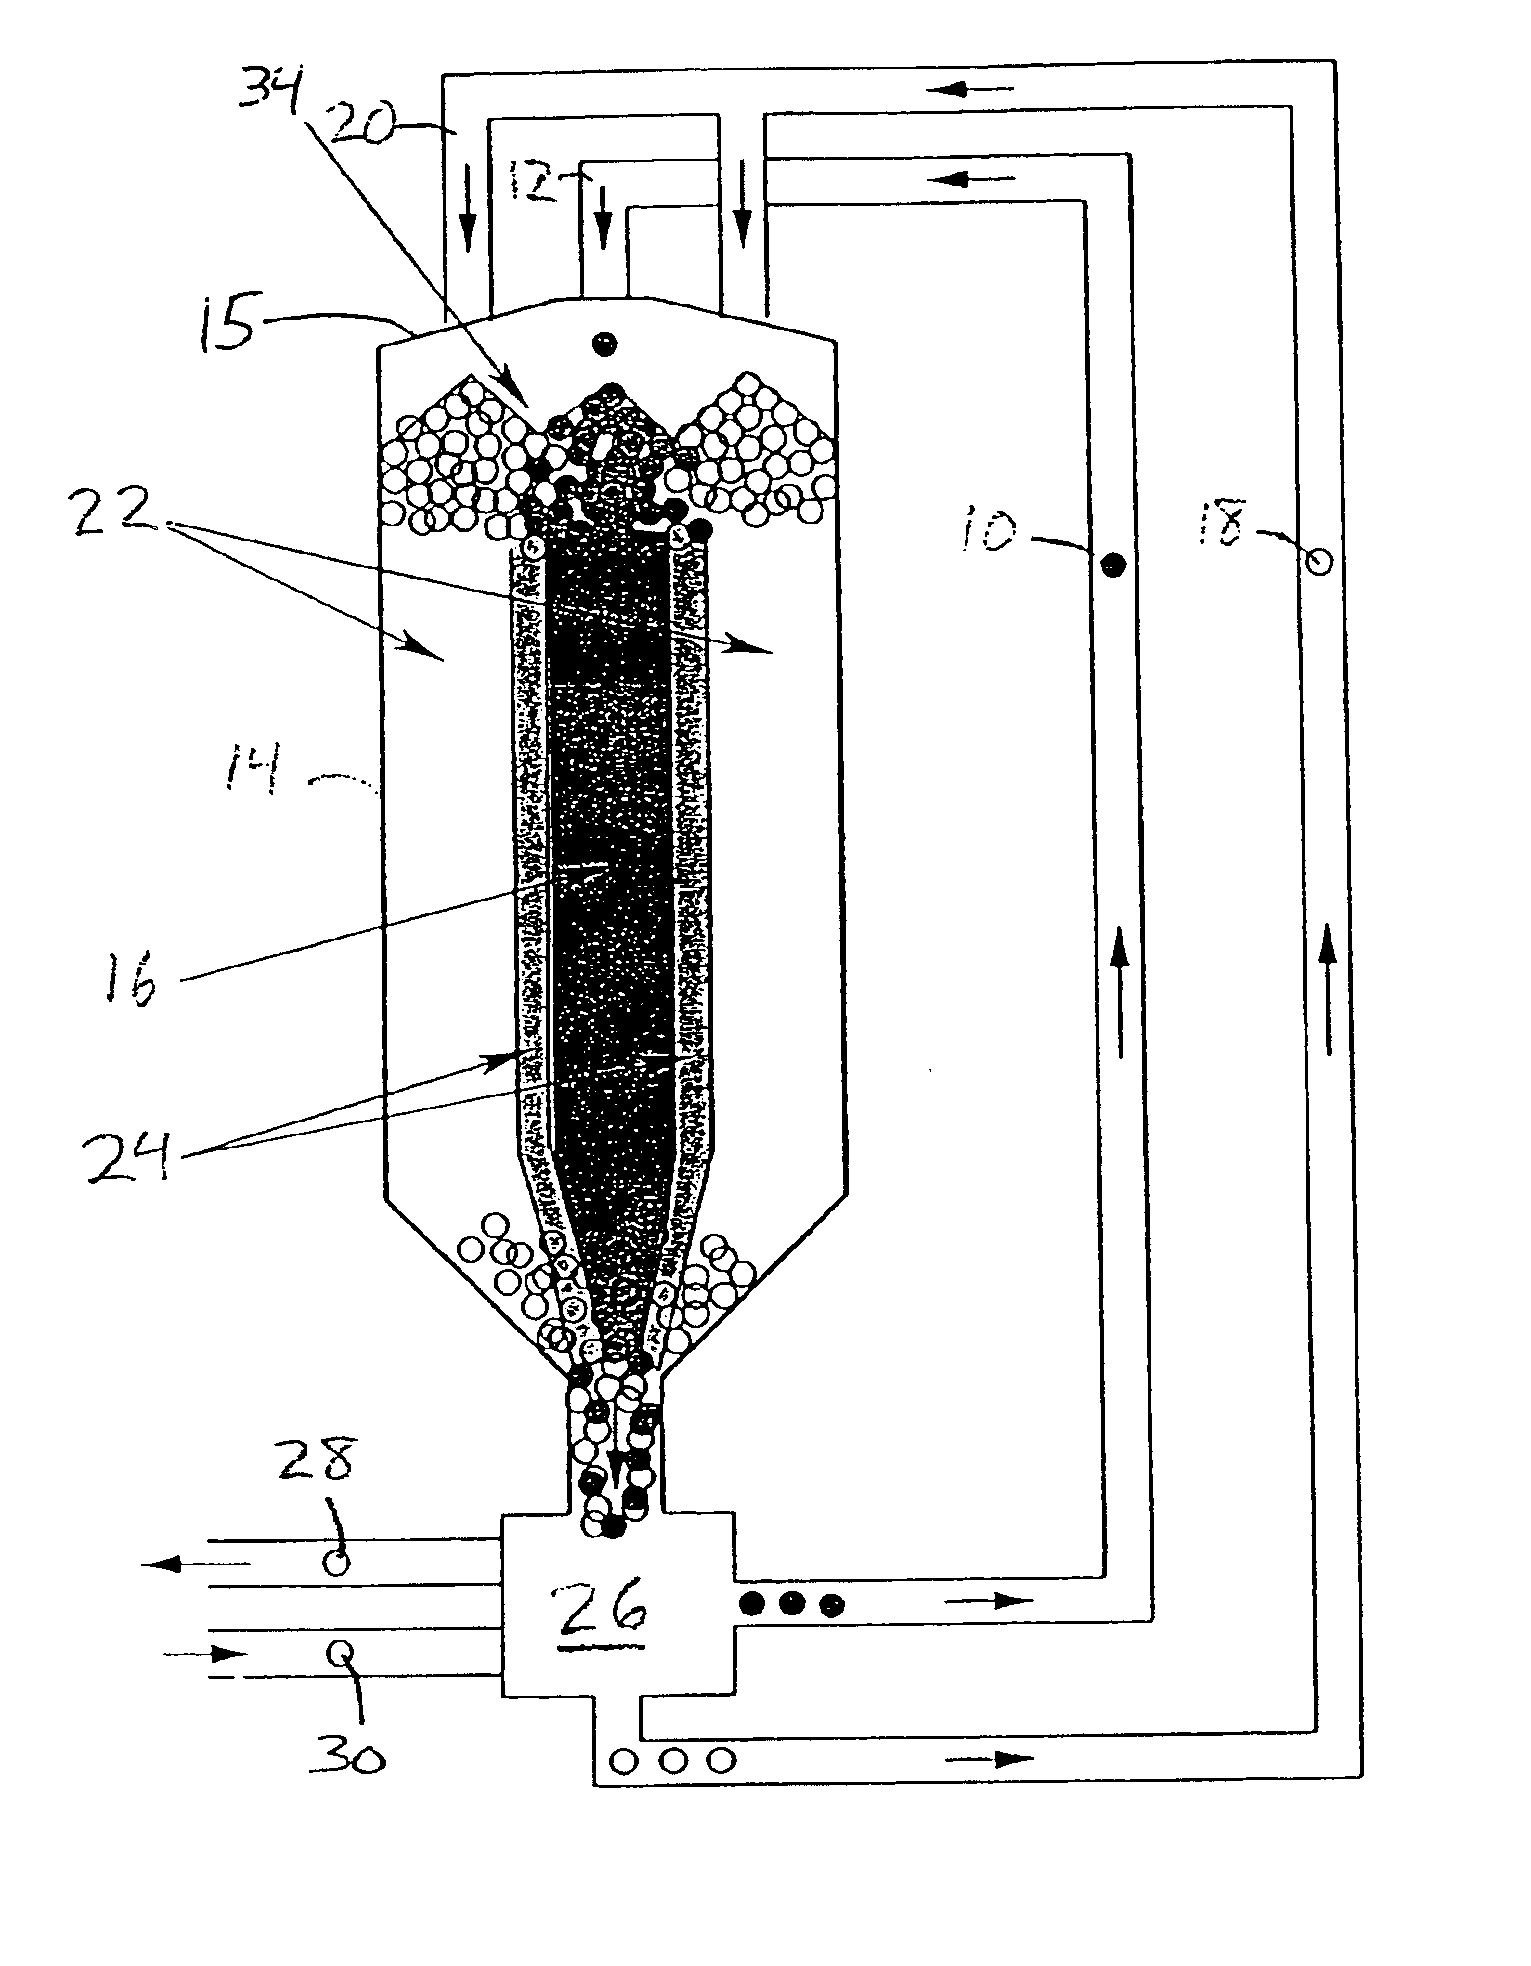 Guide ring to control granular mixing in a pebble-bed nuclear reactor